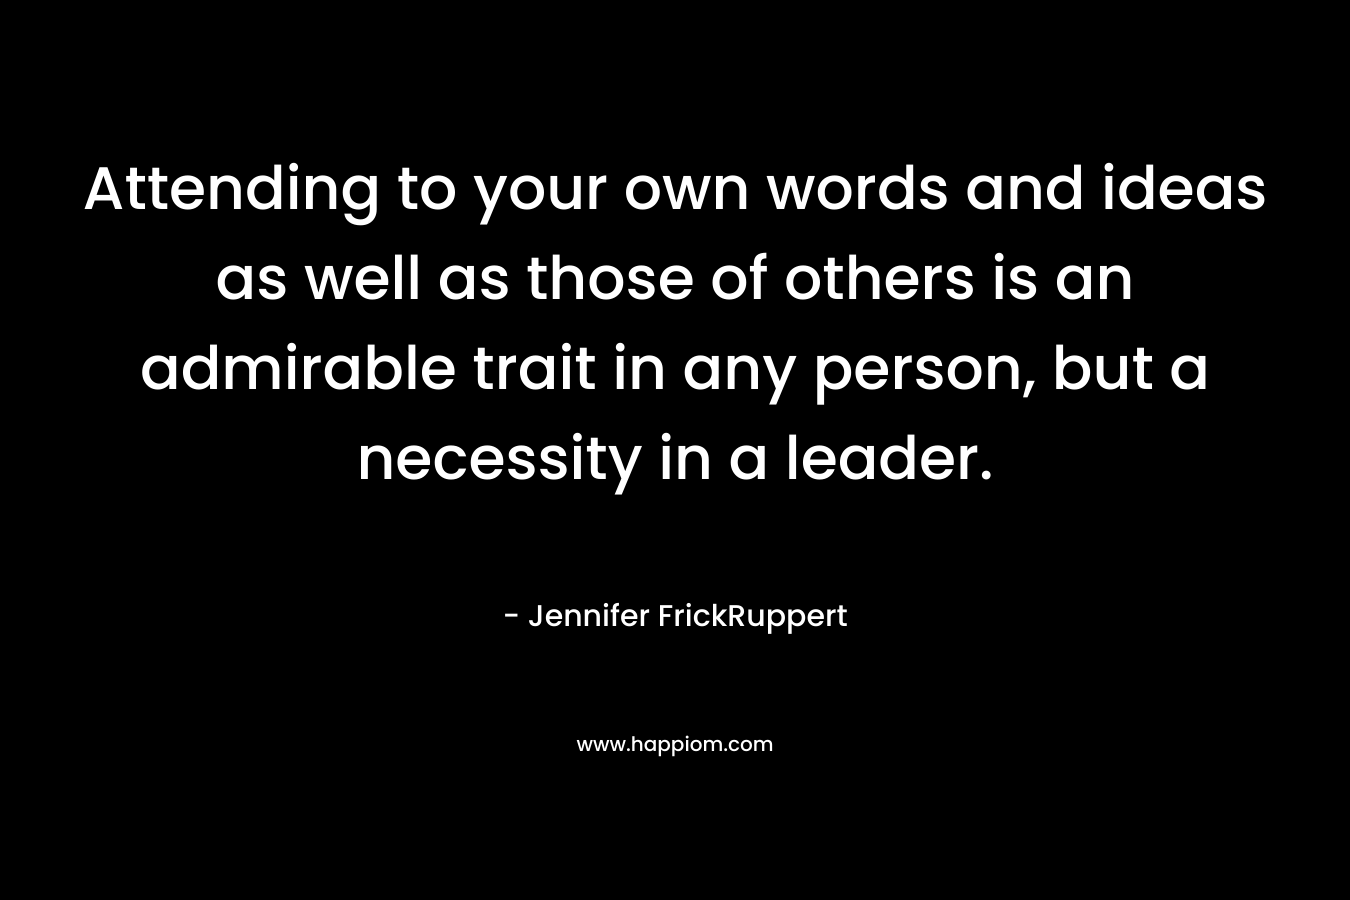 Attending to your own words and ideas as well as those of others is an admirable trait in any person, but a necessity in a leader. – Jennifer FrickRuppert